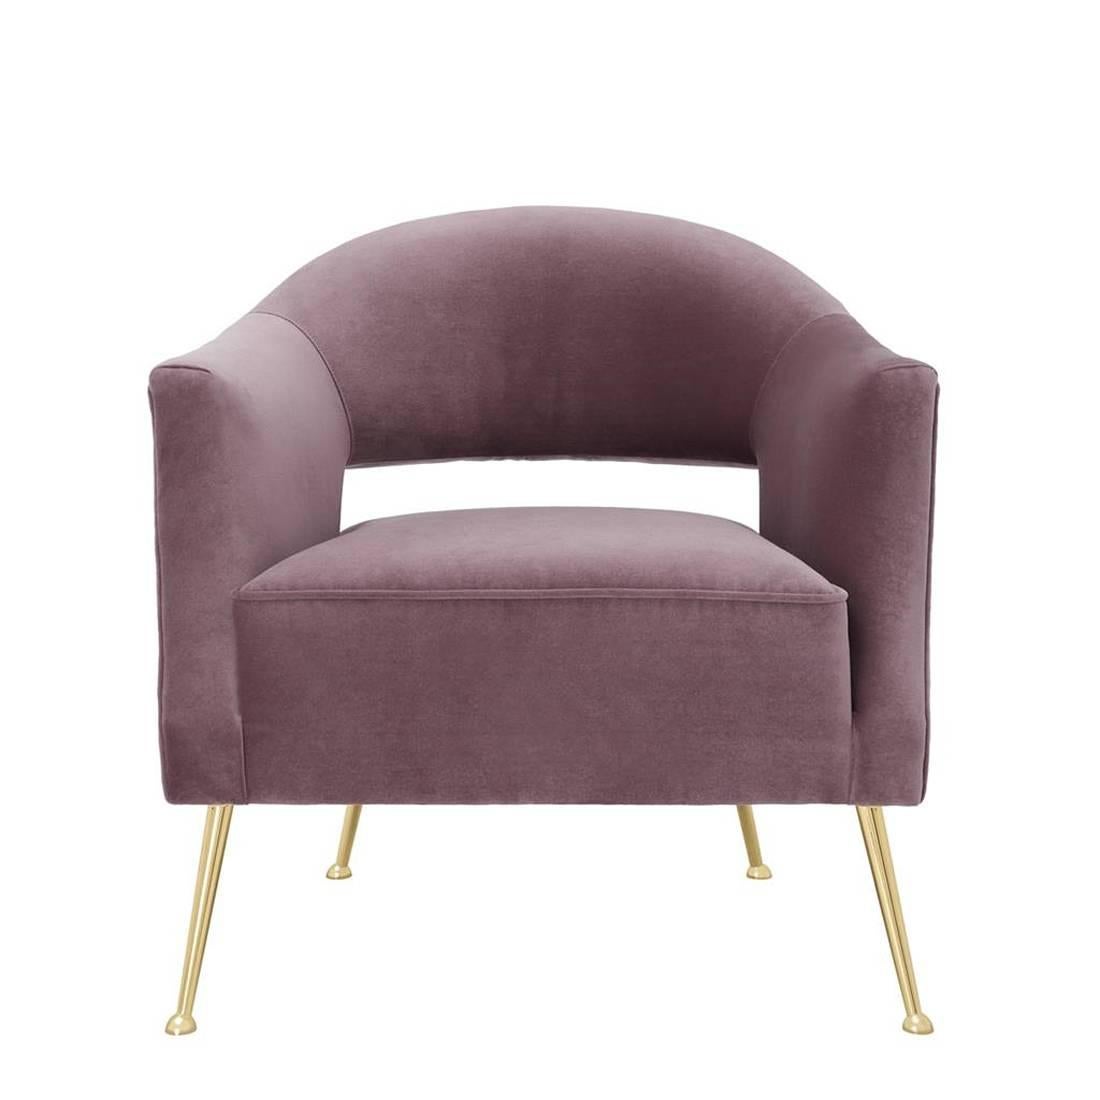 Hand-Crafted Parma Armchair in Purple Velvet Fabric